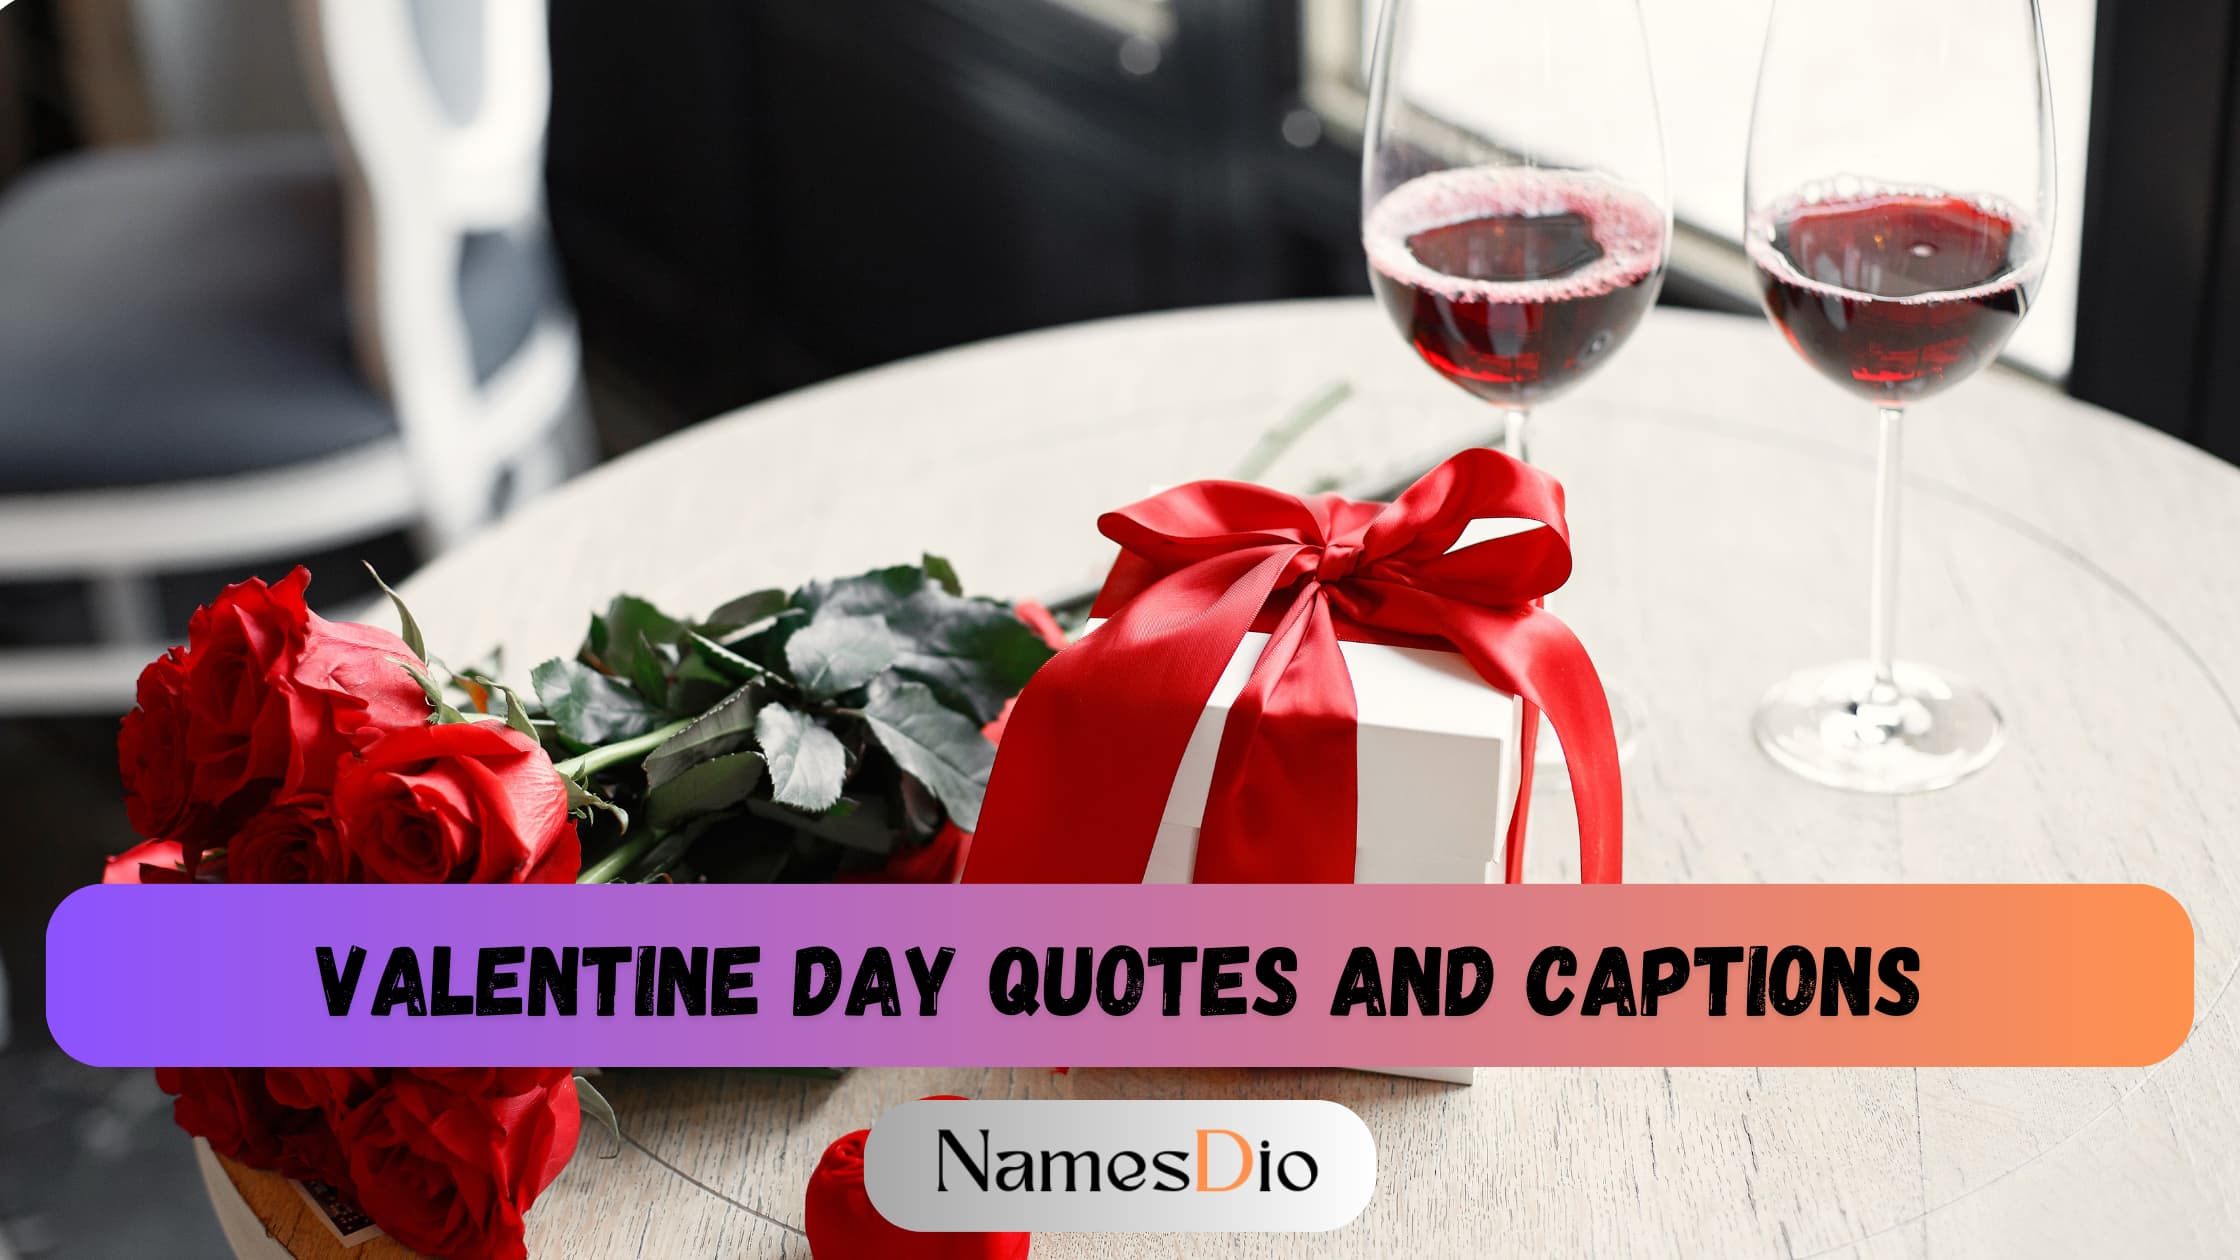 Valentine-Day-Quotes-and-Captions